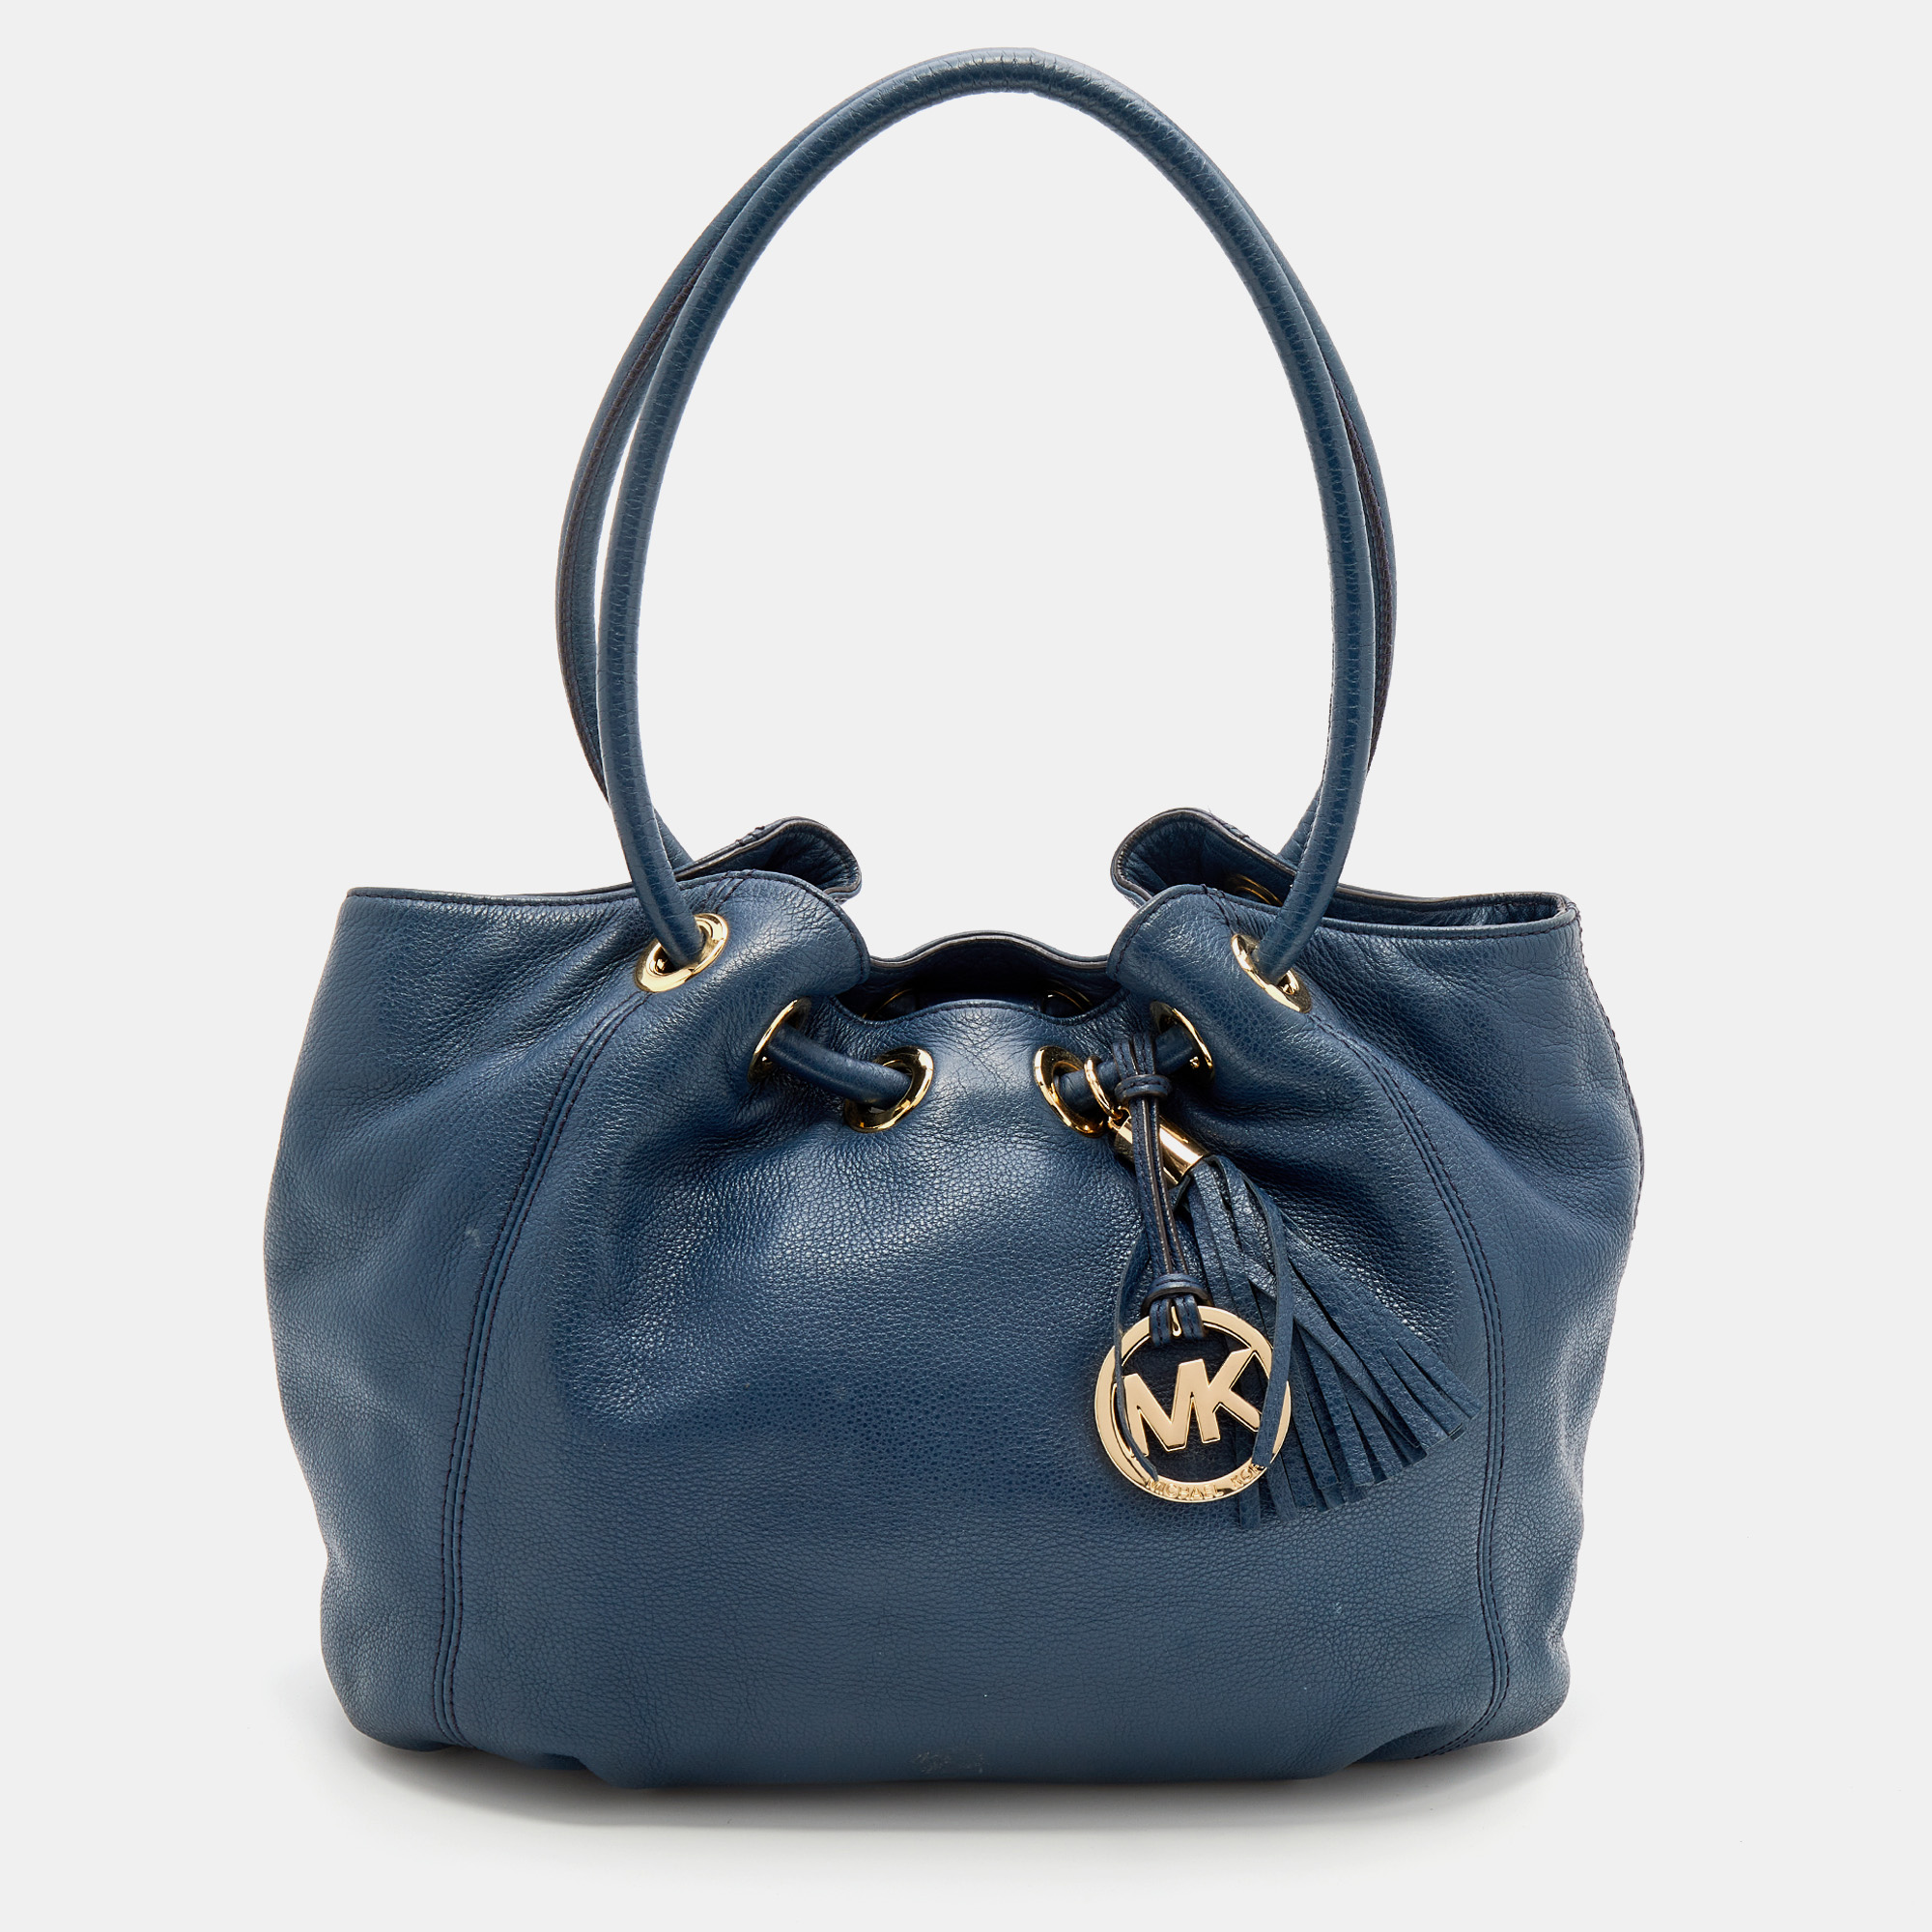 This MICHAEL Michael Kors tote is the perfect choice for long days. Made from leather it is paired with a tassel a branded charm on the front and a fabric lined interior. The bag is held by dual ring handles and it is adorned with gold tone accents.